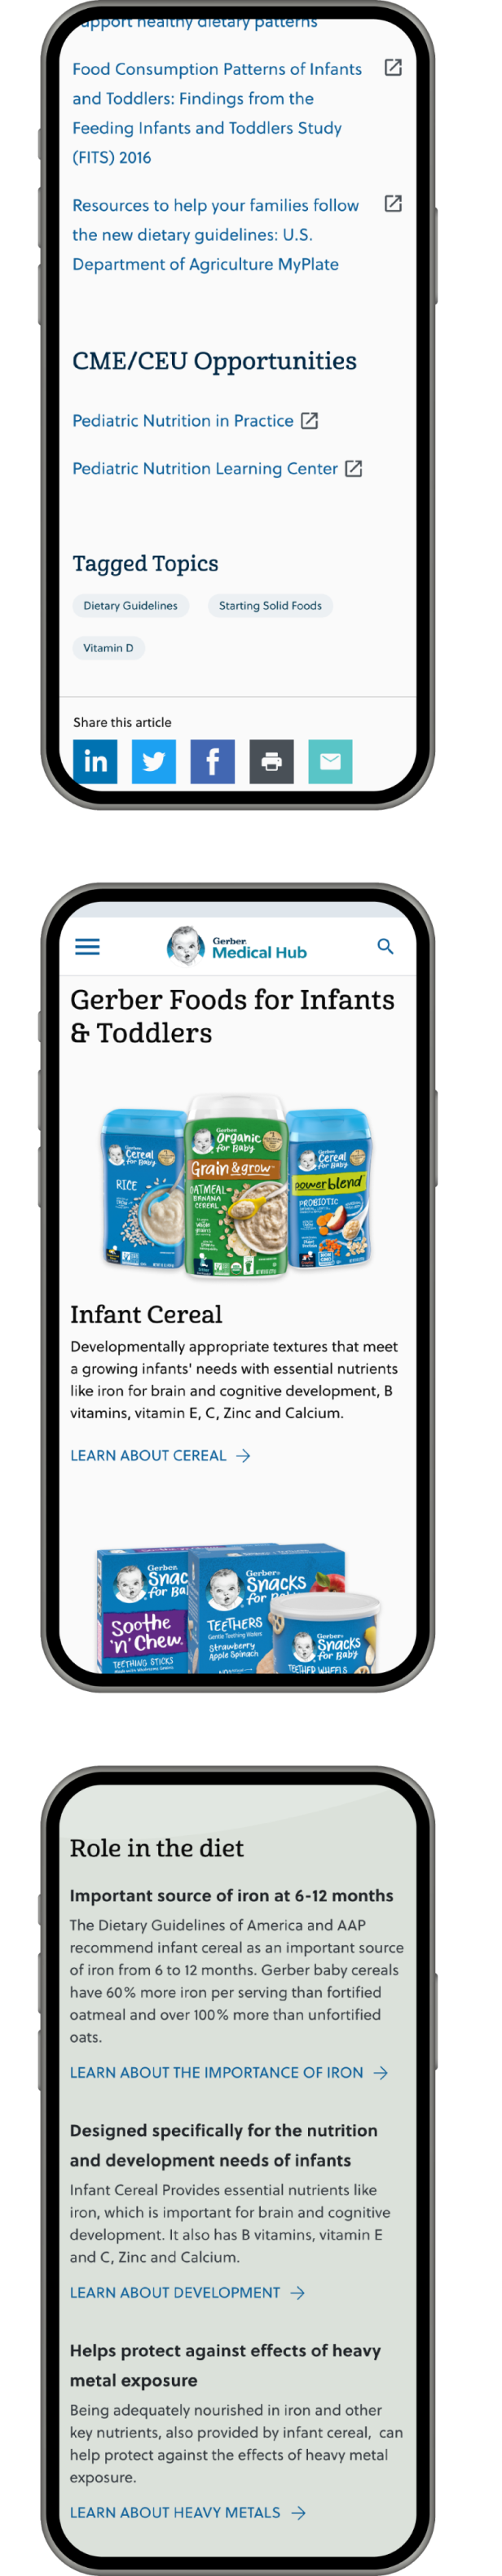 These are mobile screenshots of product pages from the redesigned website, which focus on nutritional information that is important to healthcare professionals.